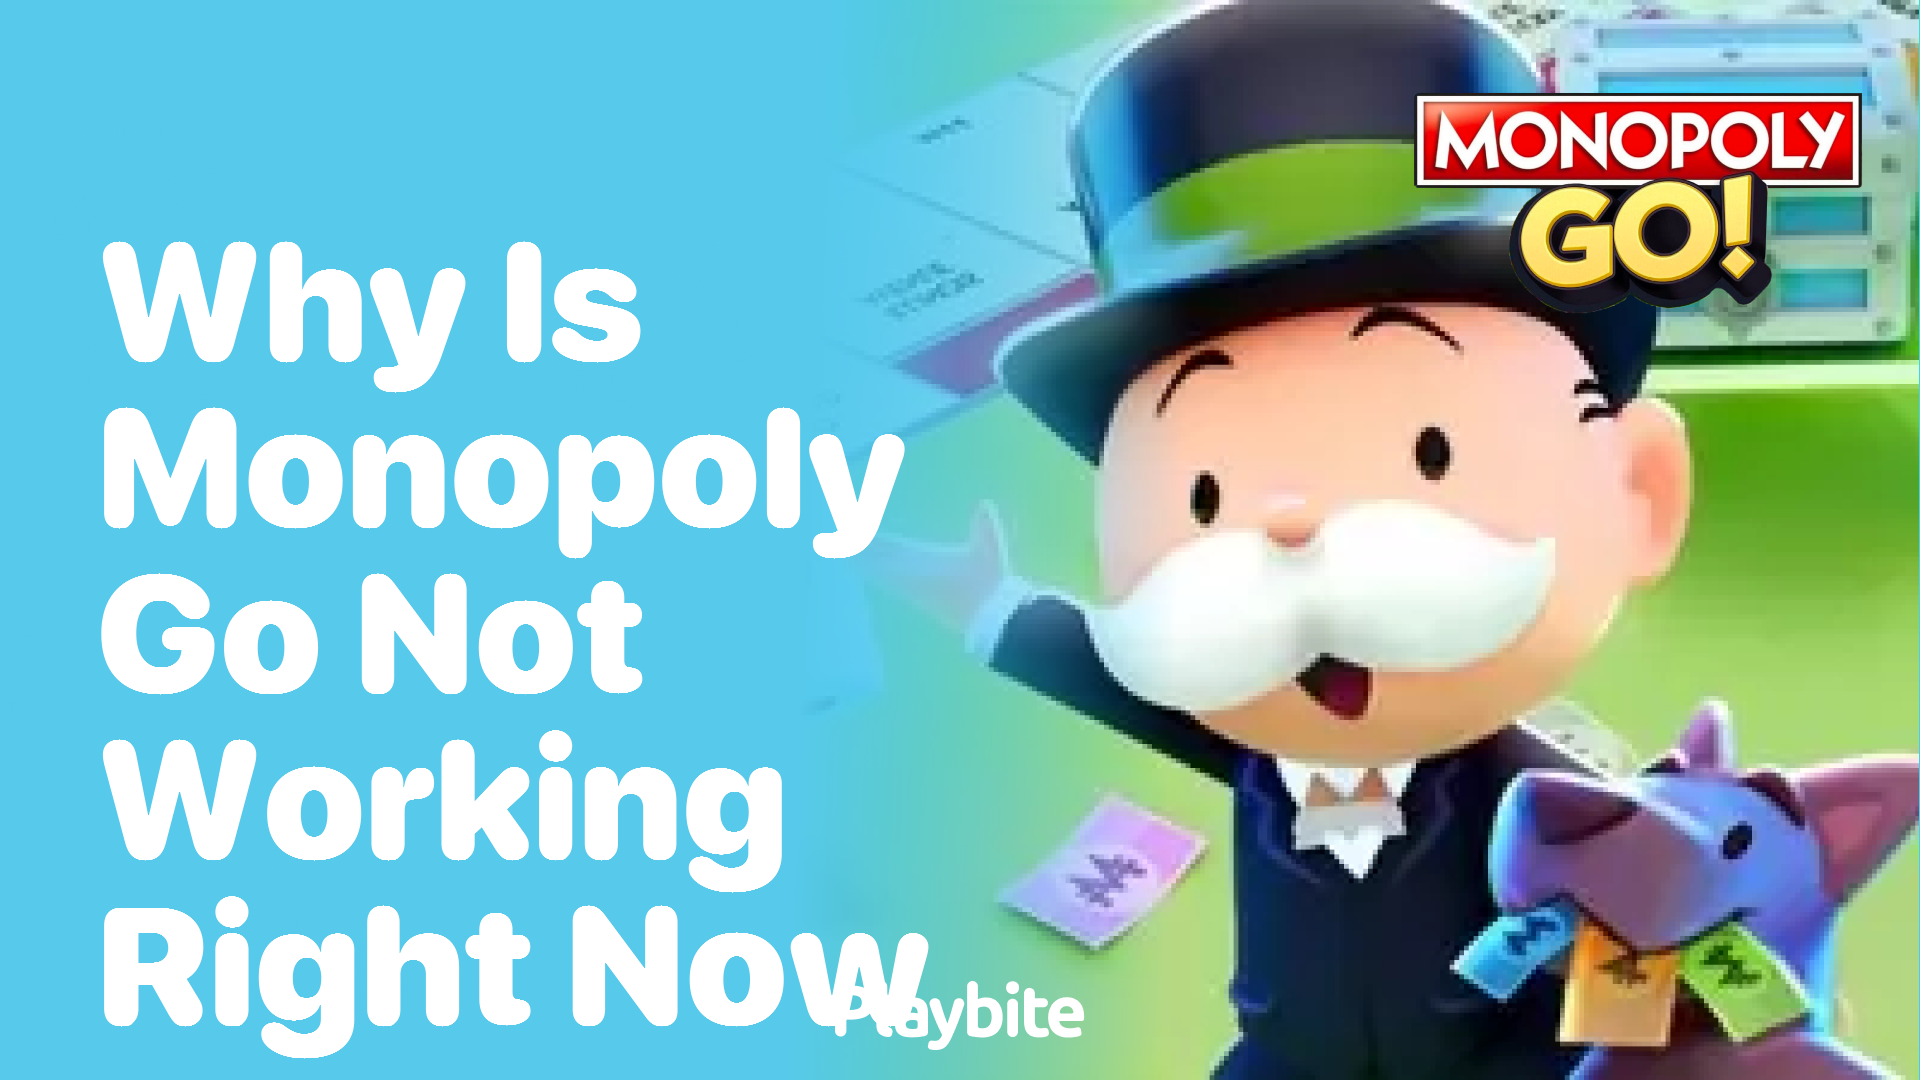 Why Is Monopoly Go Not Working Right Now?